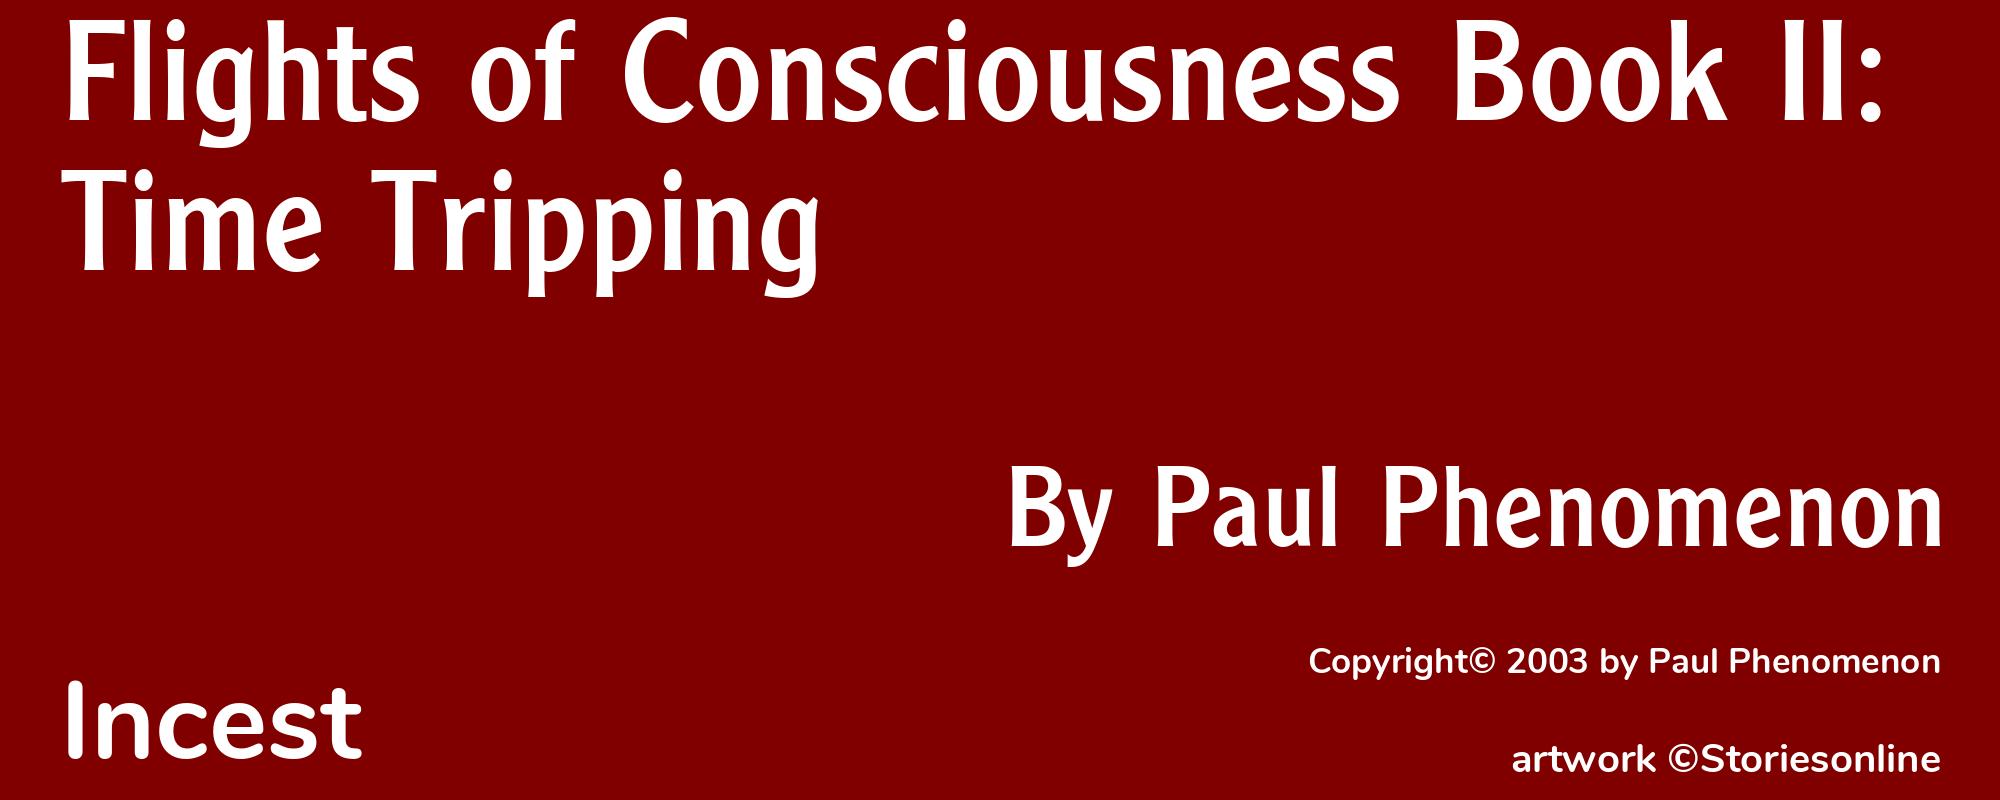 Flights of Consciousness Book II: Time Tripping - Cover